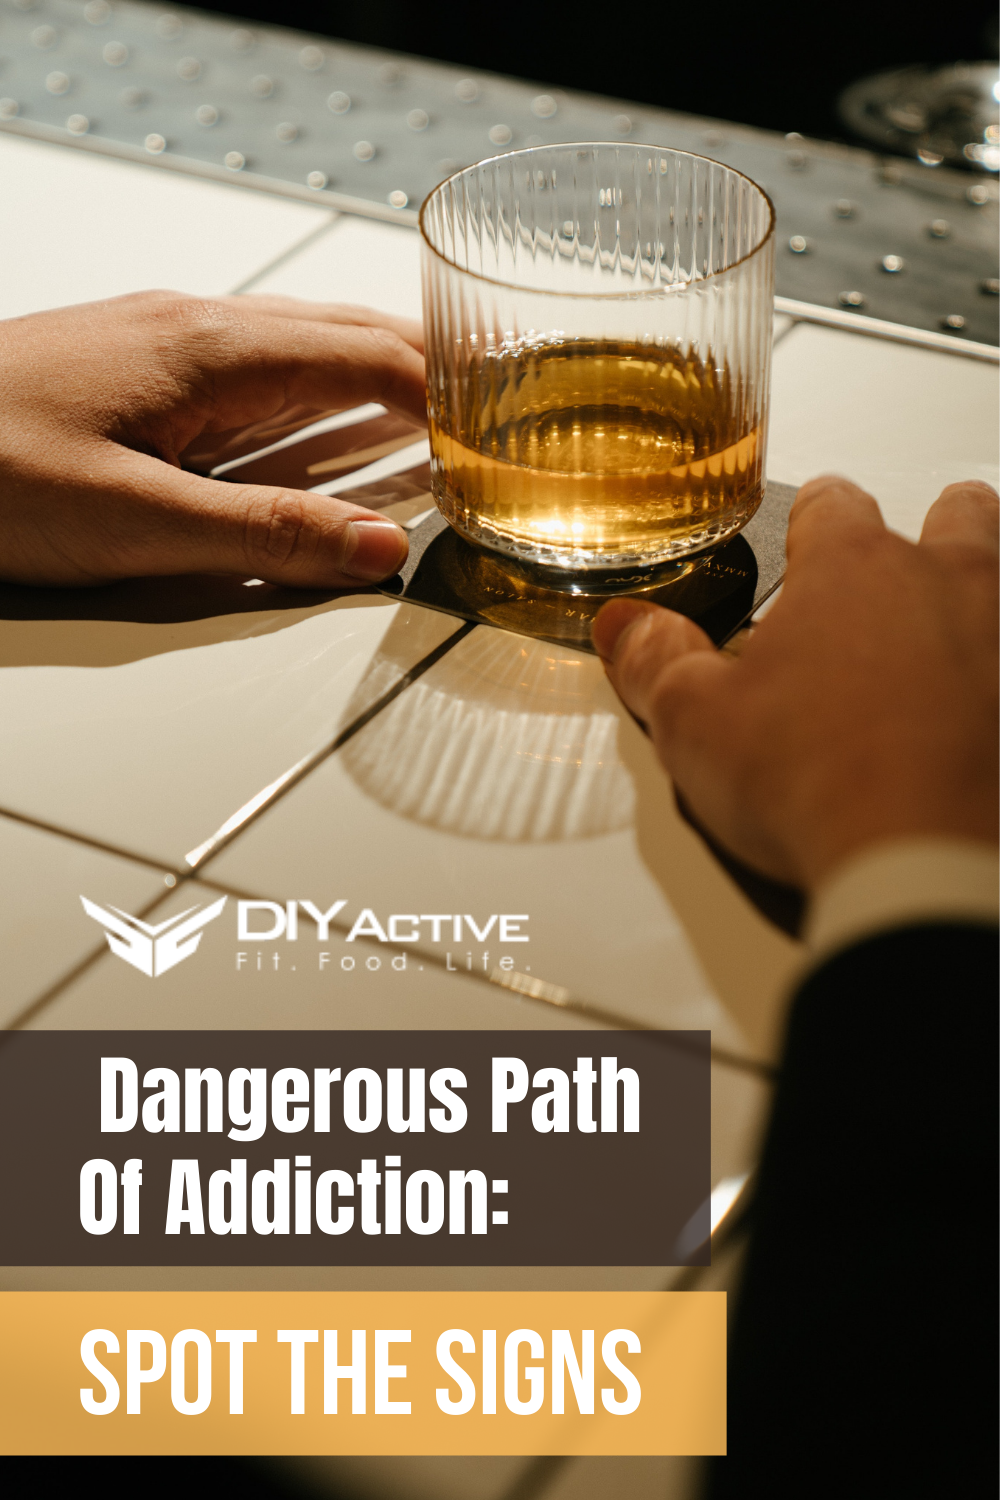 Are You Walking On The Dangerous Path Of Addiction: Spot The Signs Now